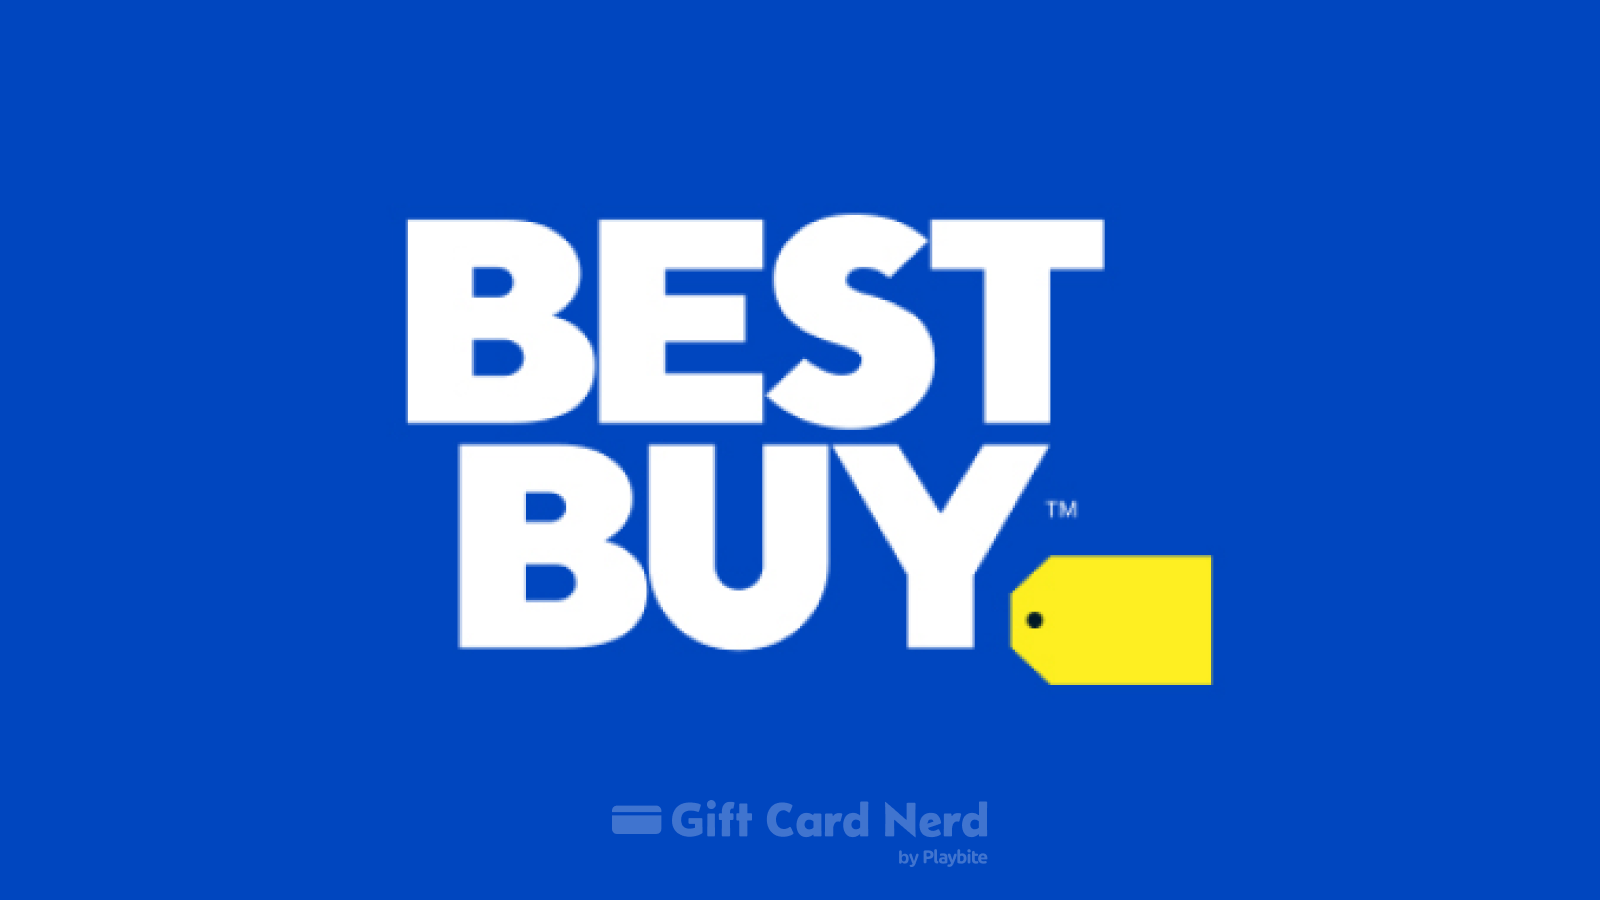 Can You Buy Best Buy Gift Cards at Walgreens?